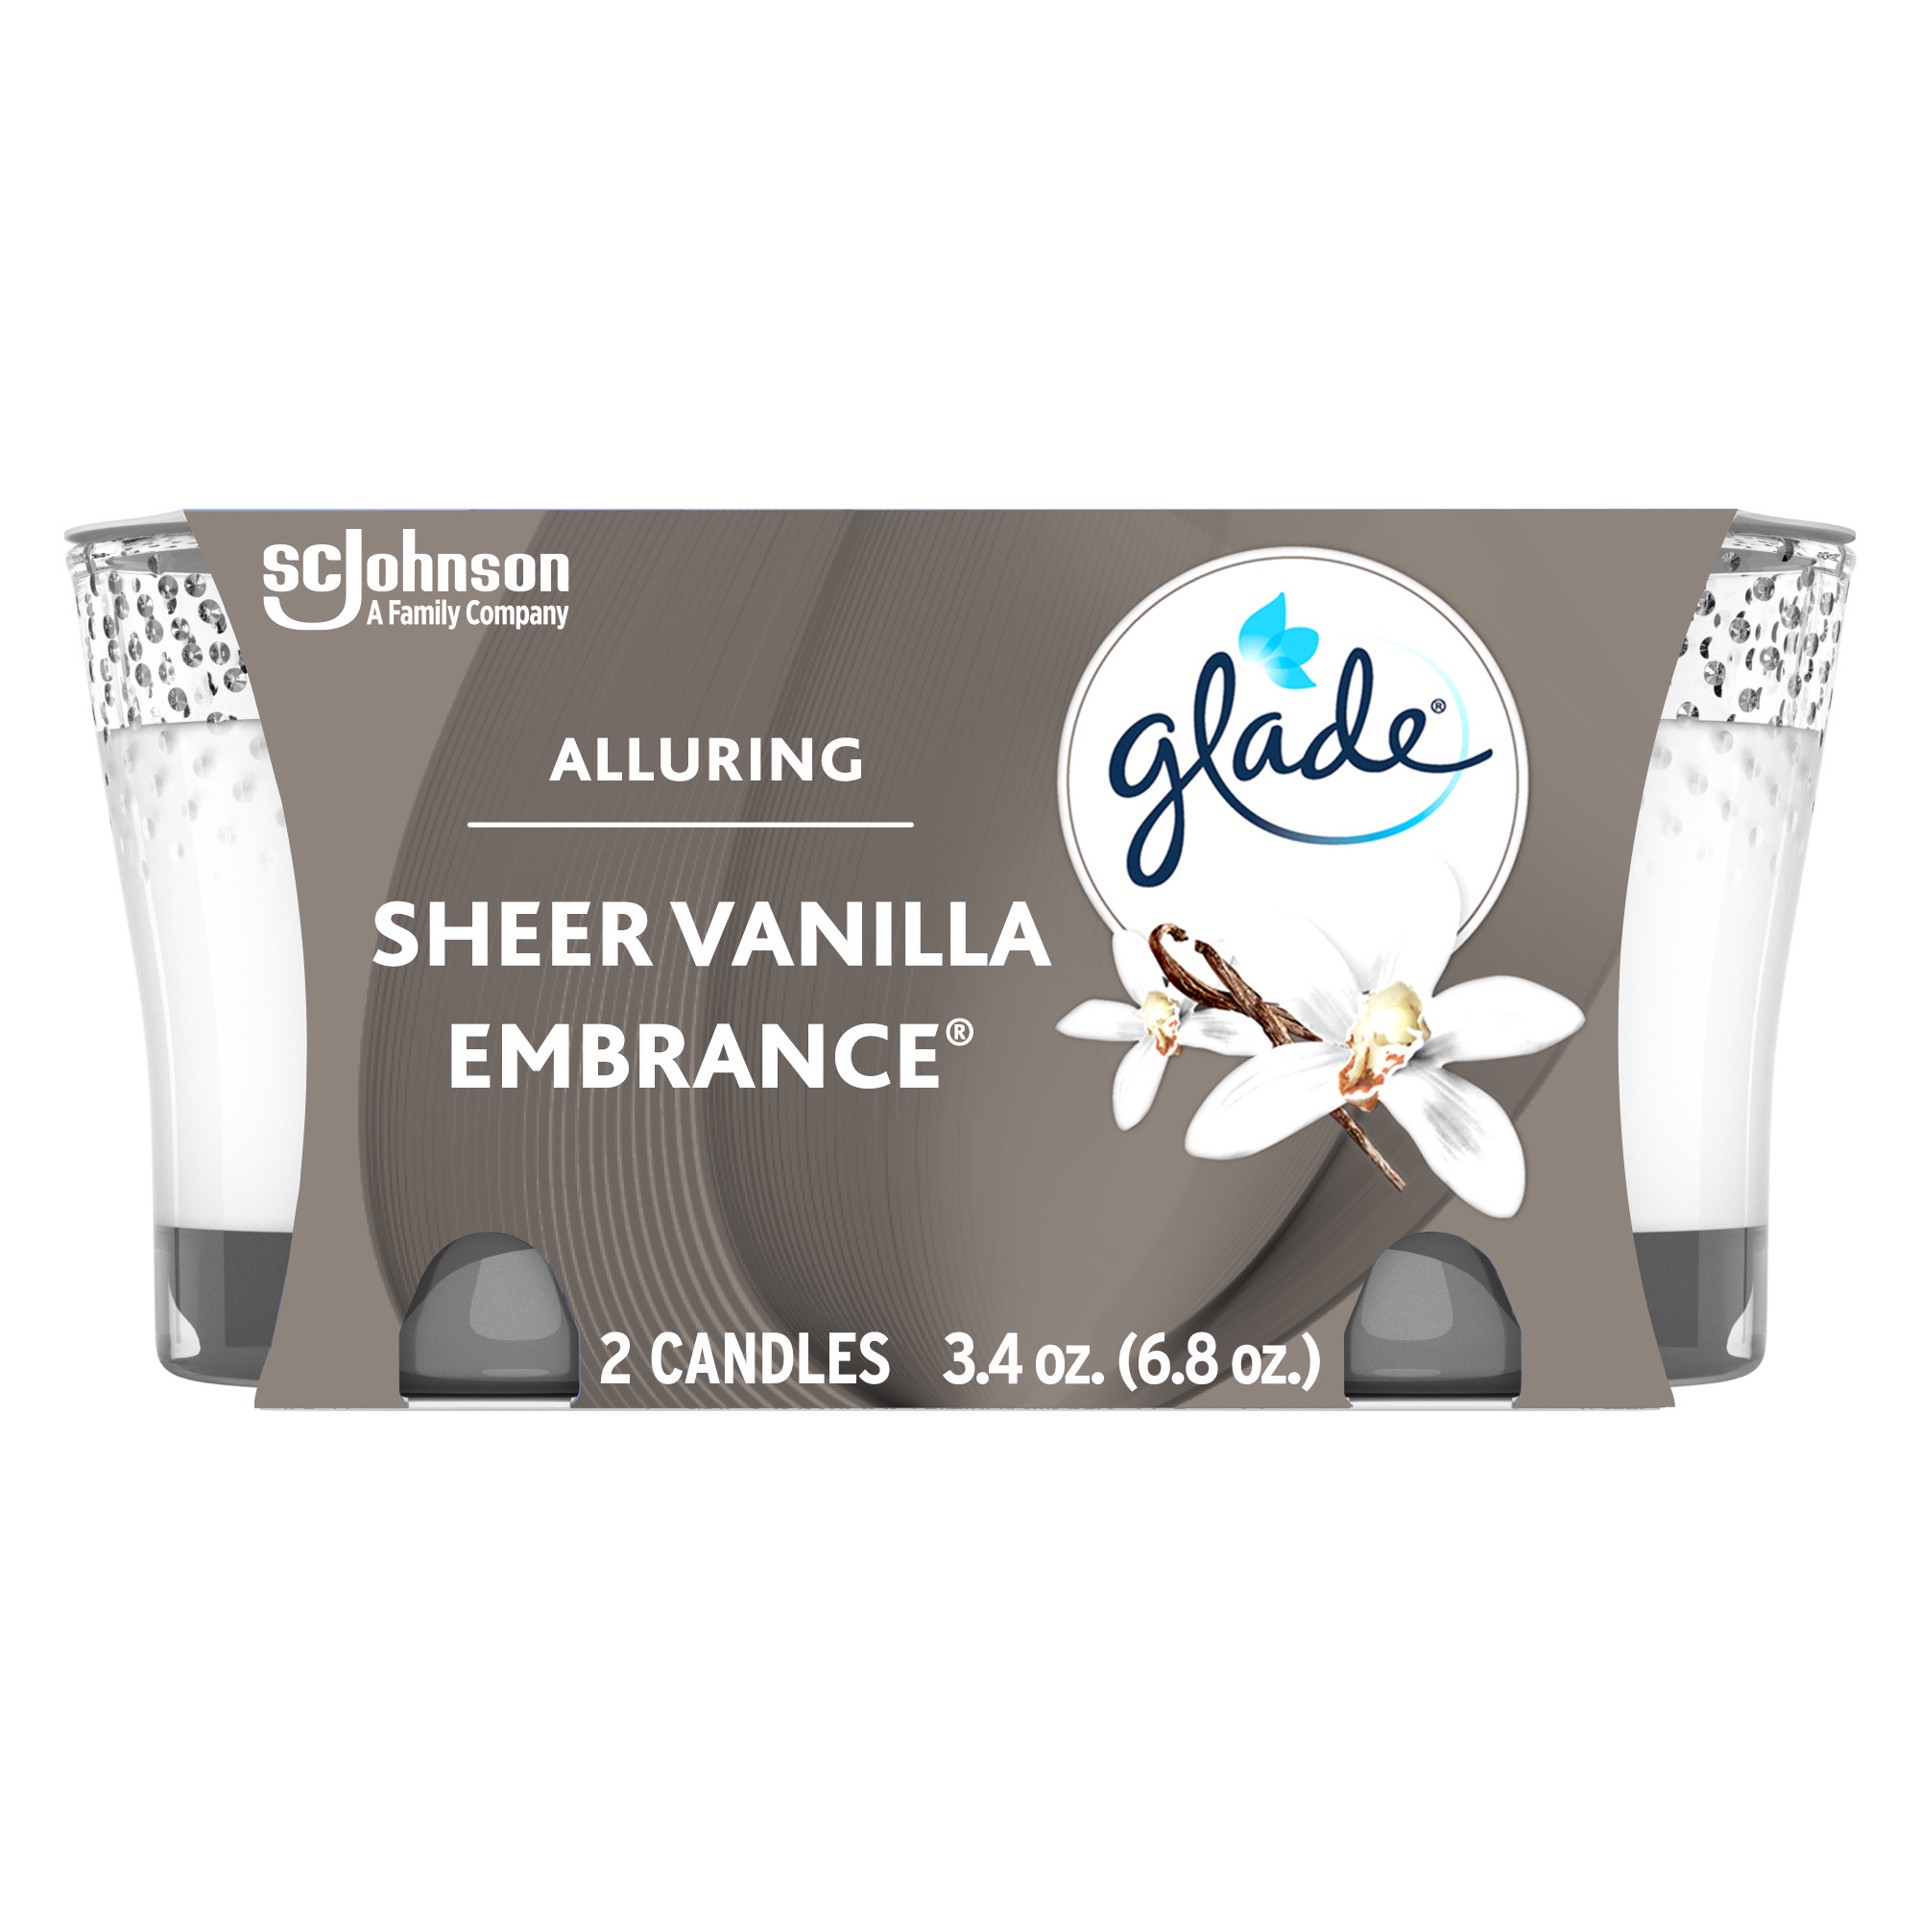 slide 5 of 5, Glade Candle Alluring Sheer Vanilla Embrace Scent, 1-Wick, 3.4 oz (96.3 g) Each, 2 Counts, Fragrance Infused with Essential Oils, Notes of Vanilla Blossom, White Orchid, Sandalwood, Lead-Free Wick, 6.8 oz